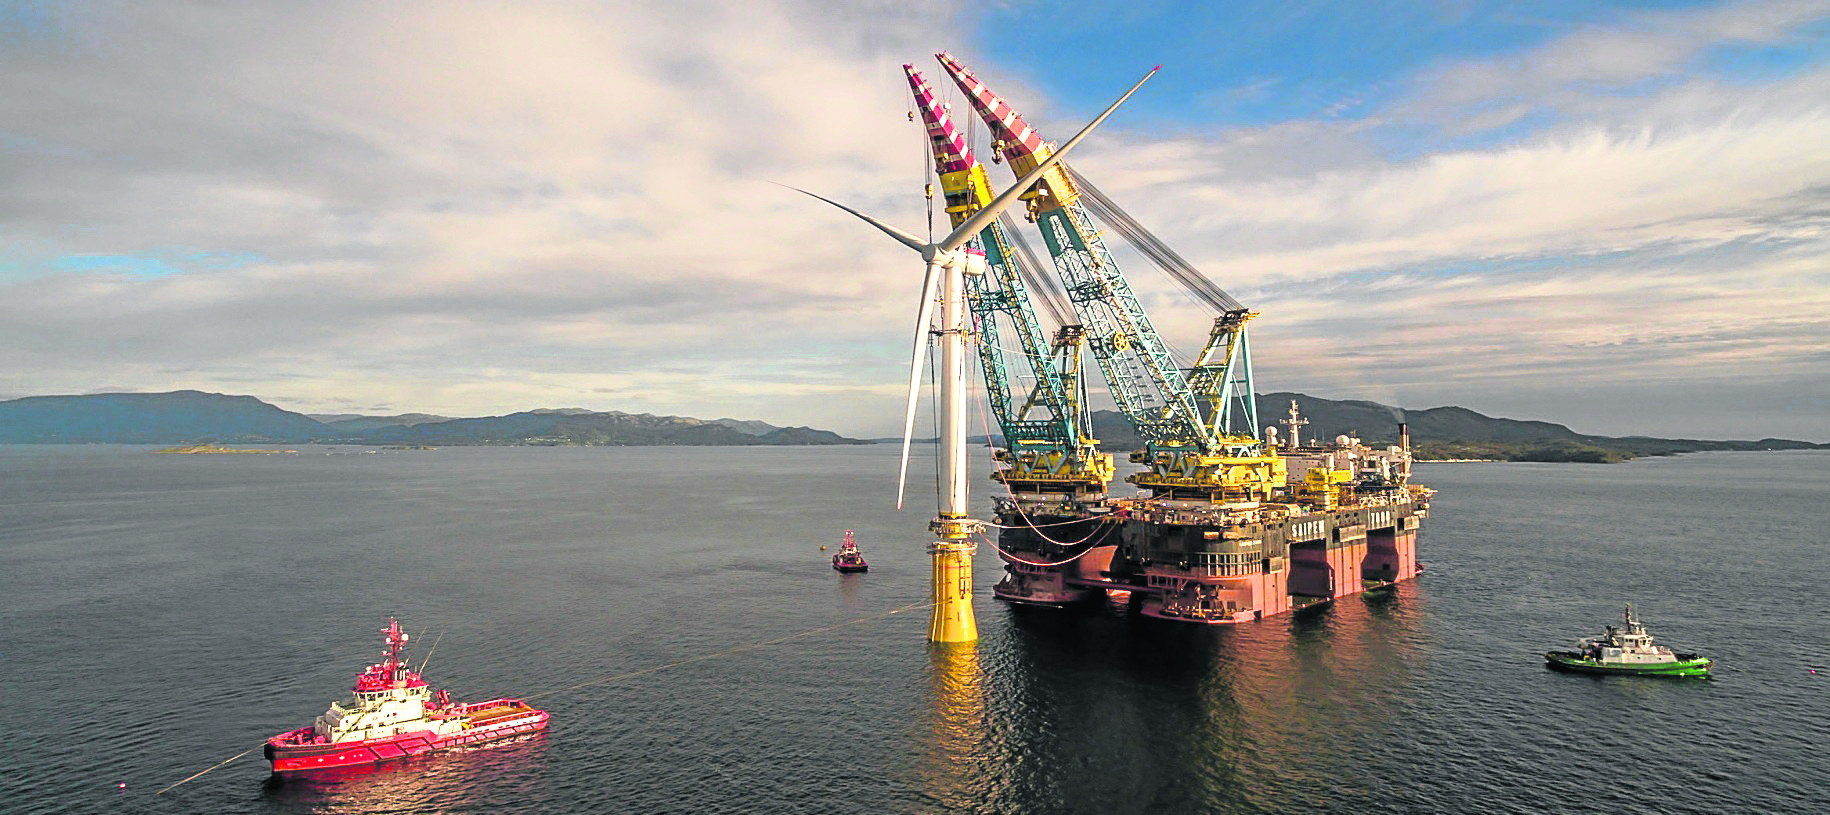 The Saipem 7000 crane vessel installing the Hywind turbine towers onto their foundations.